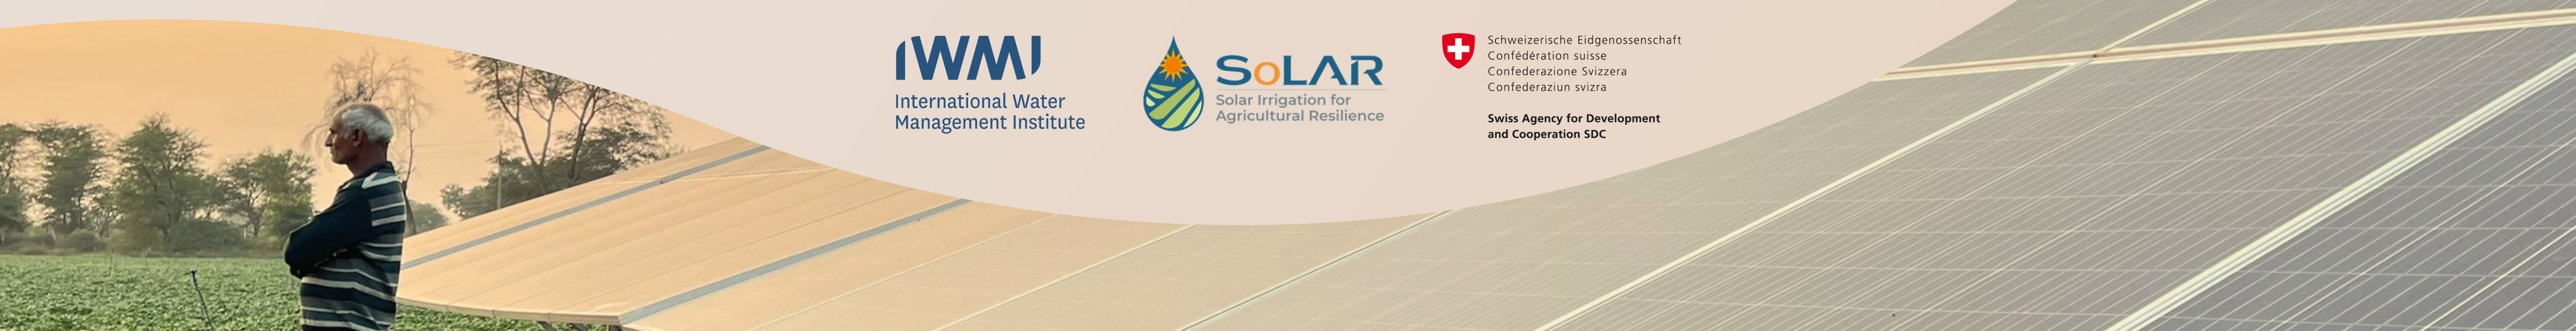 Solar Irrigation for Agricultural Resilience (SoLAR)